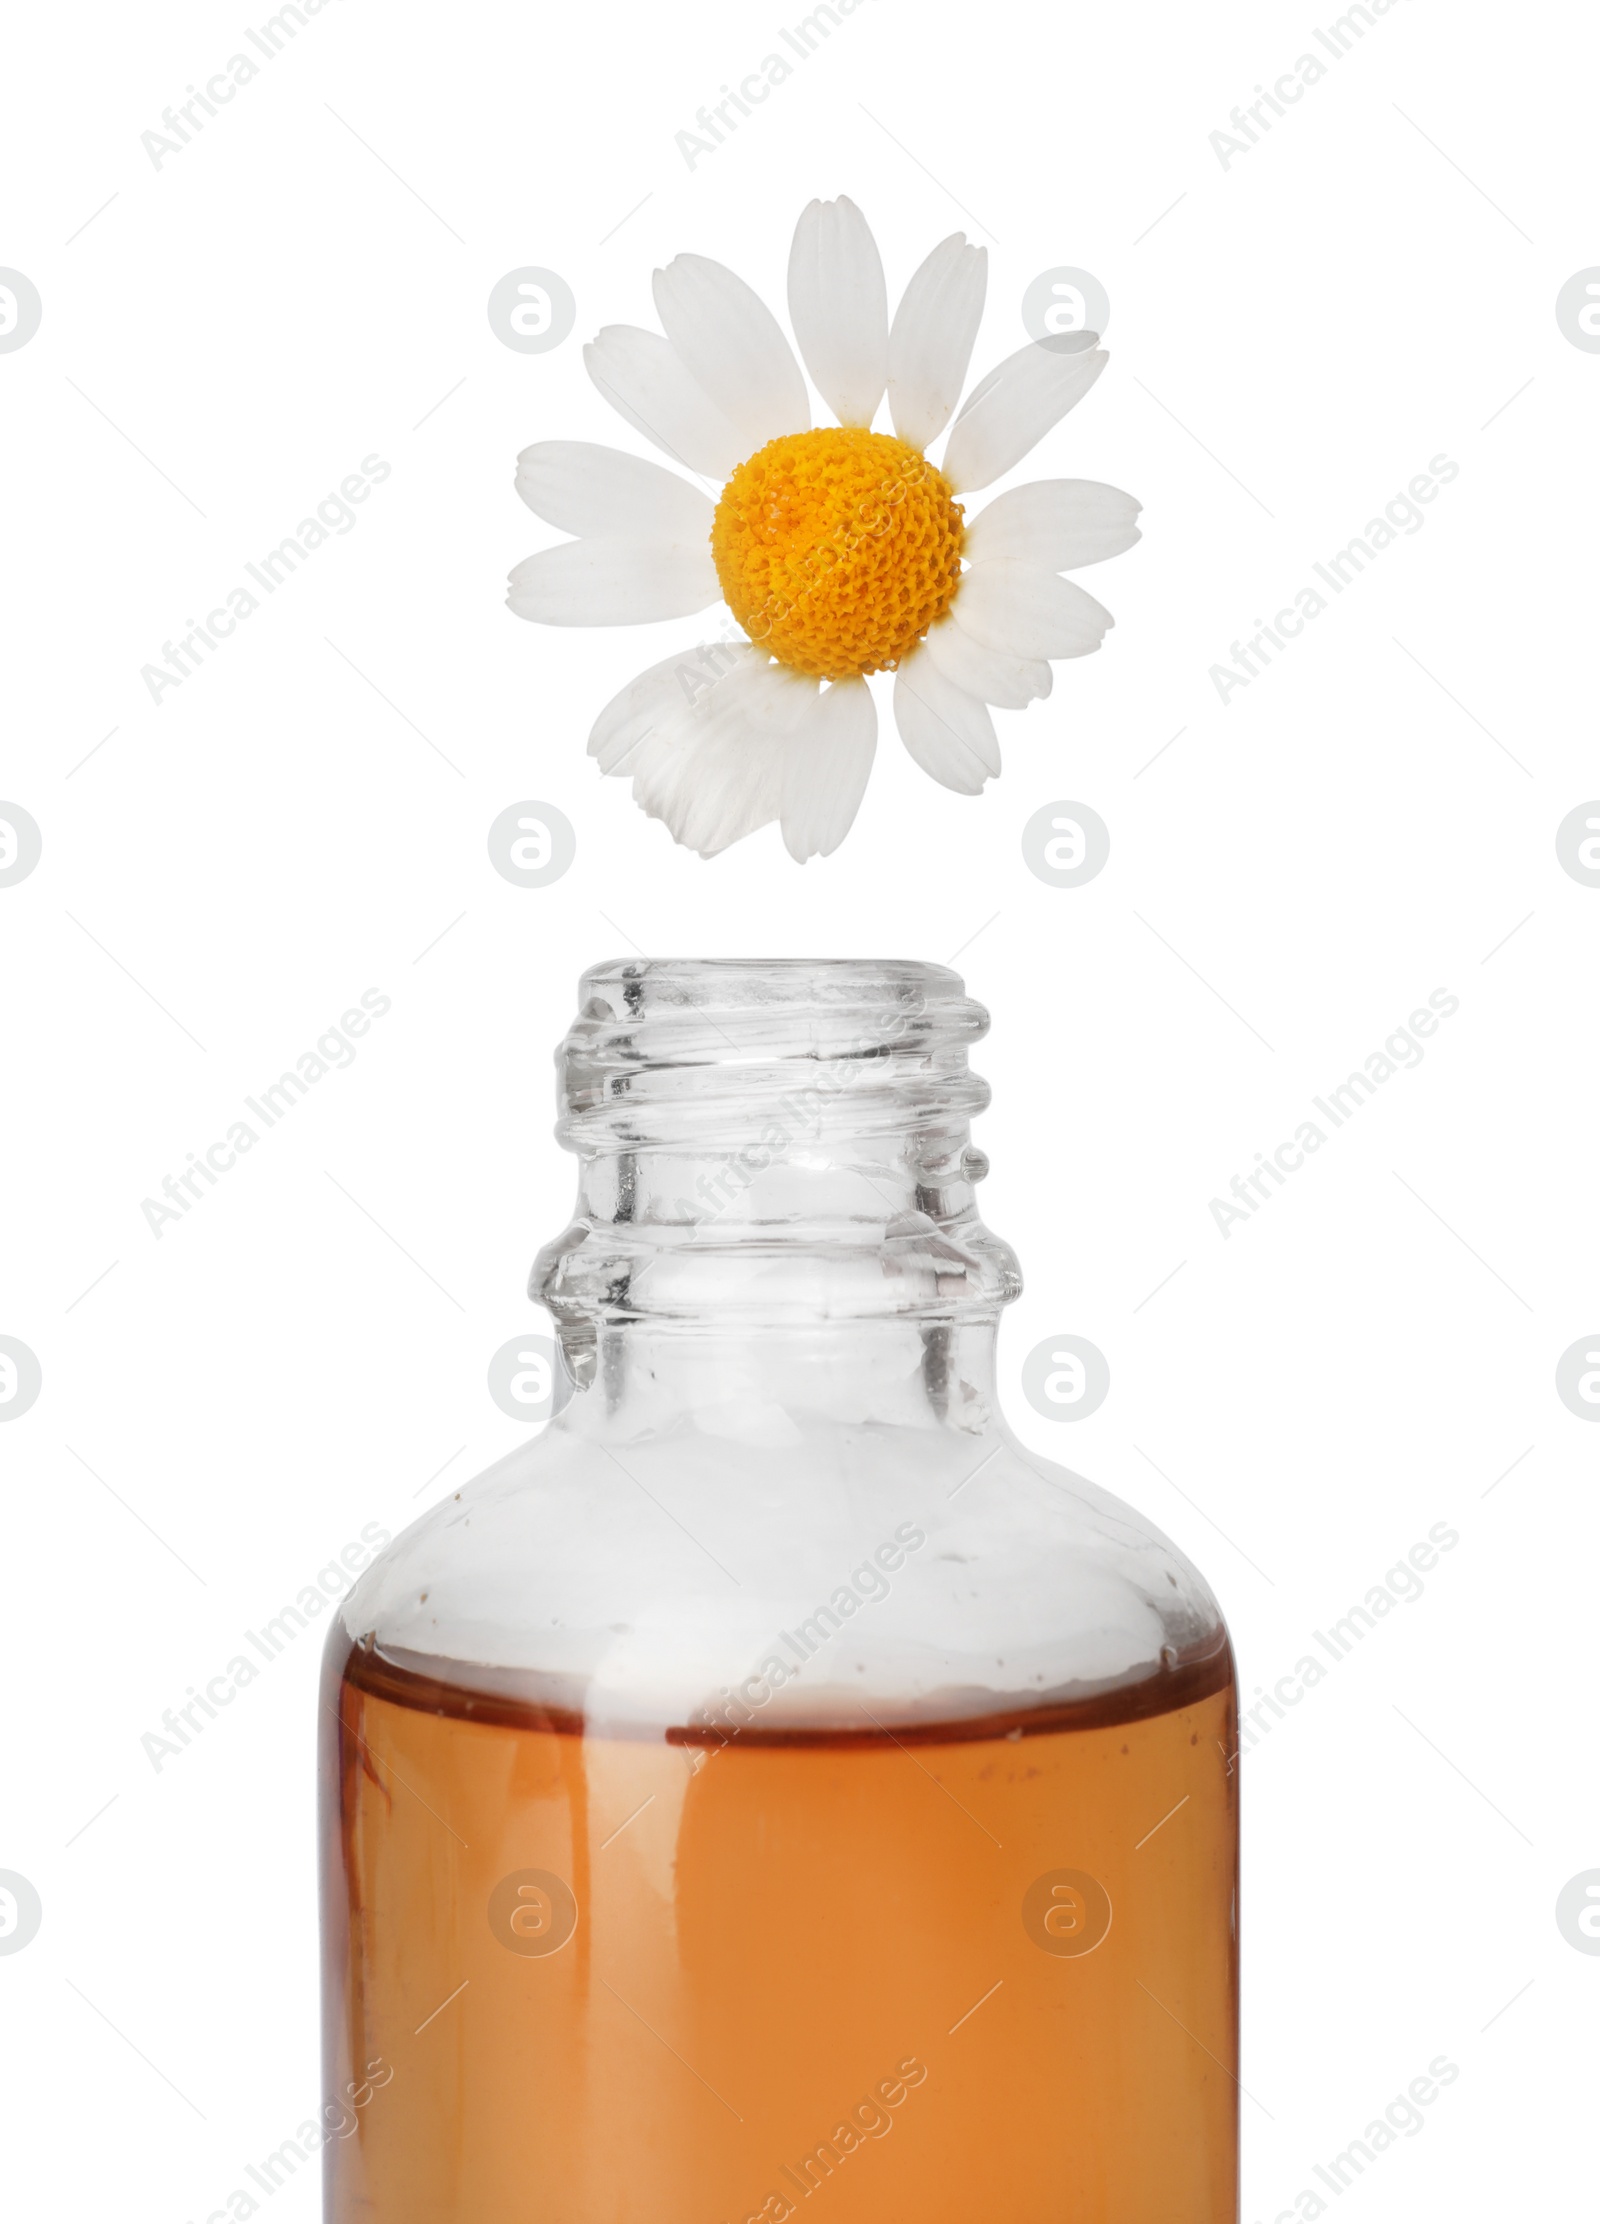 Photo of Essential oil dripping from chamomile petal into glass bottle on white background